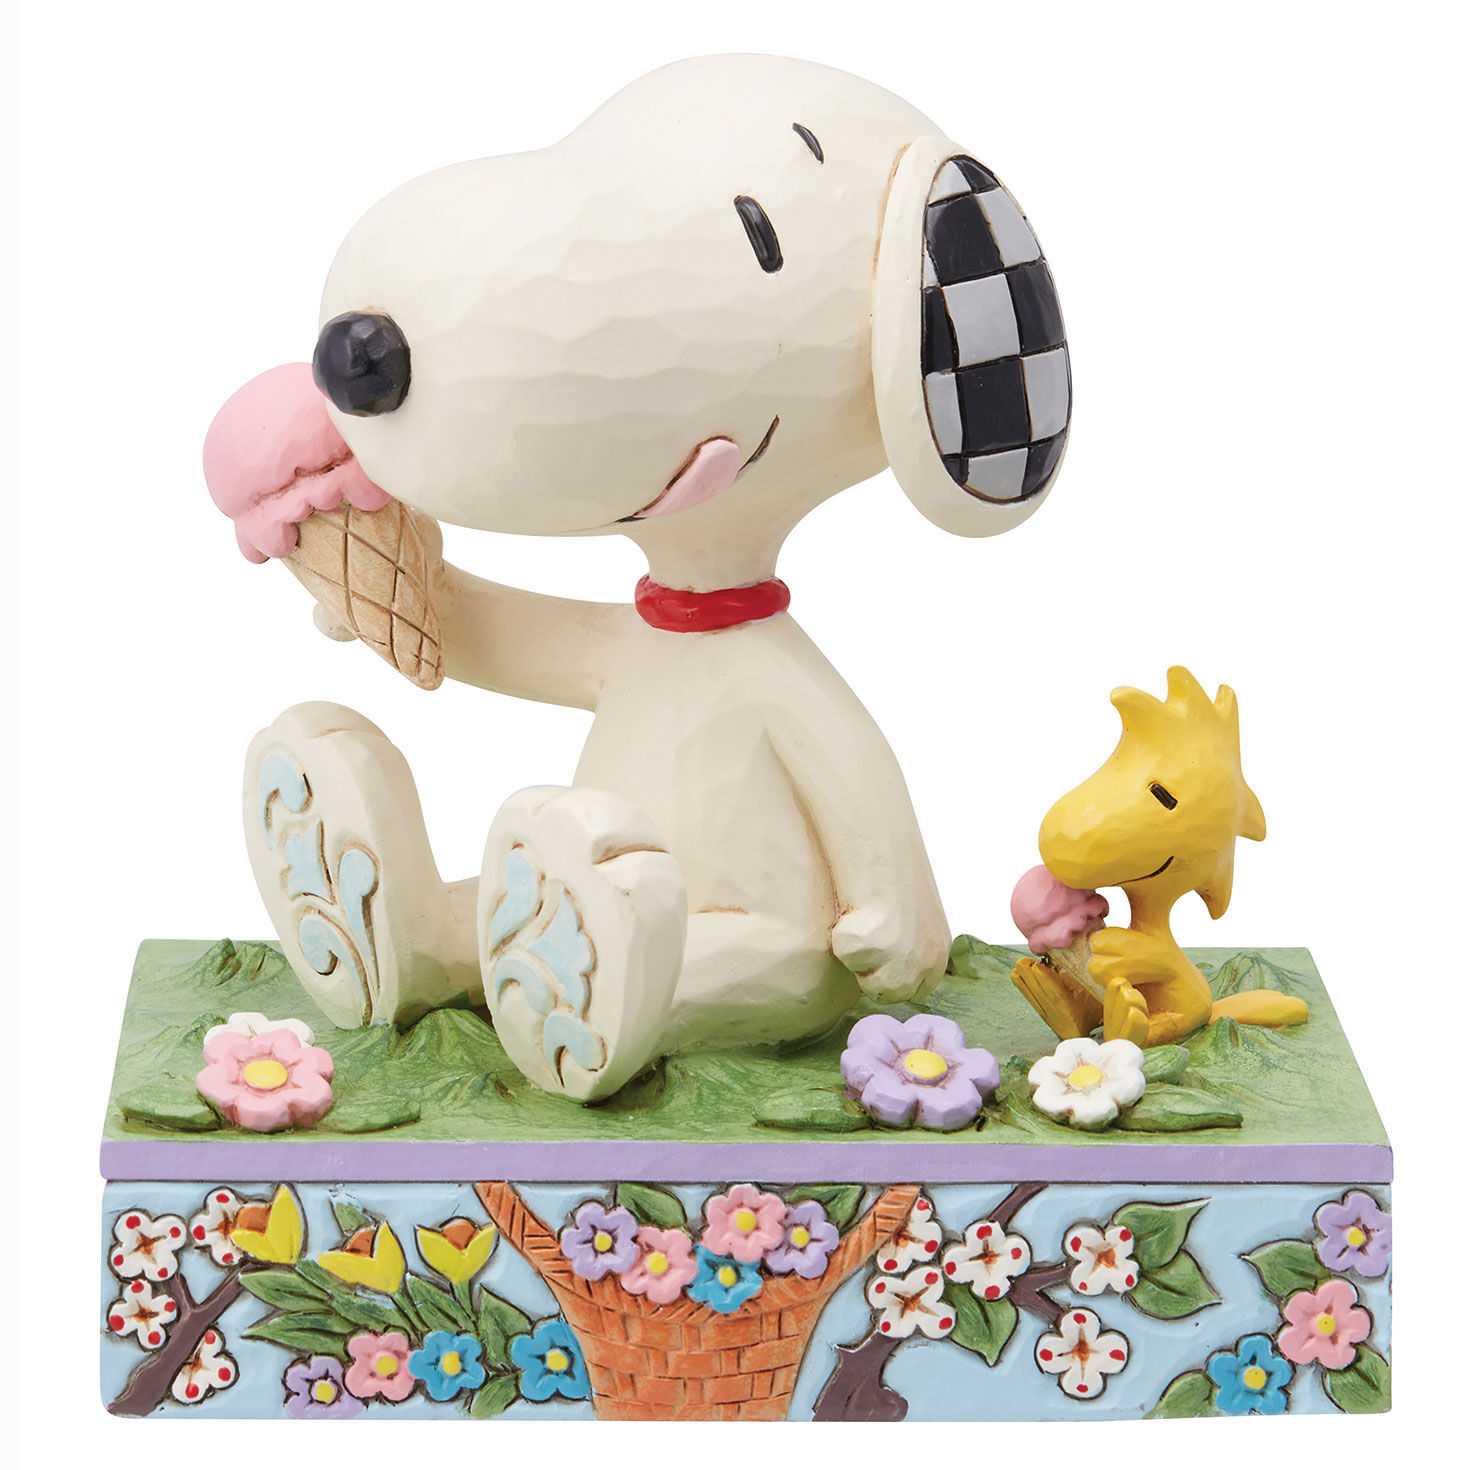 https://www.hallmark.com/dw/image/v2/AALB_PRD/on/demandware.static/-/Sites-hallmark-master/default/dw494000a5/images/finished-goods/products/6014349/Jim-Shore-Peanuts-Snoopy-and-Woodstock-Figurine_6014349_01.jpg?sfrm=jpg